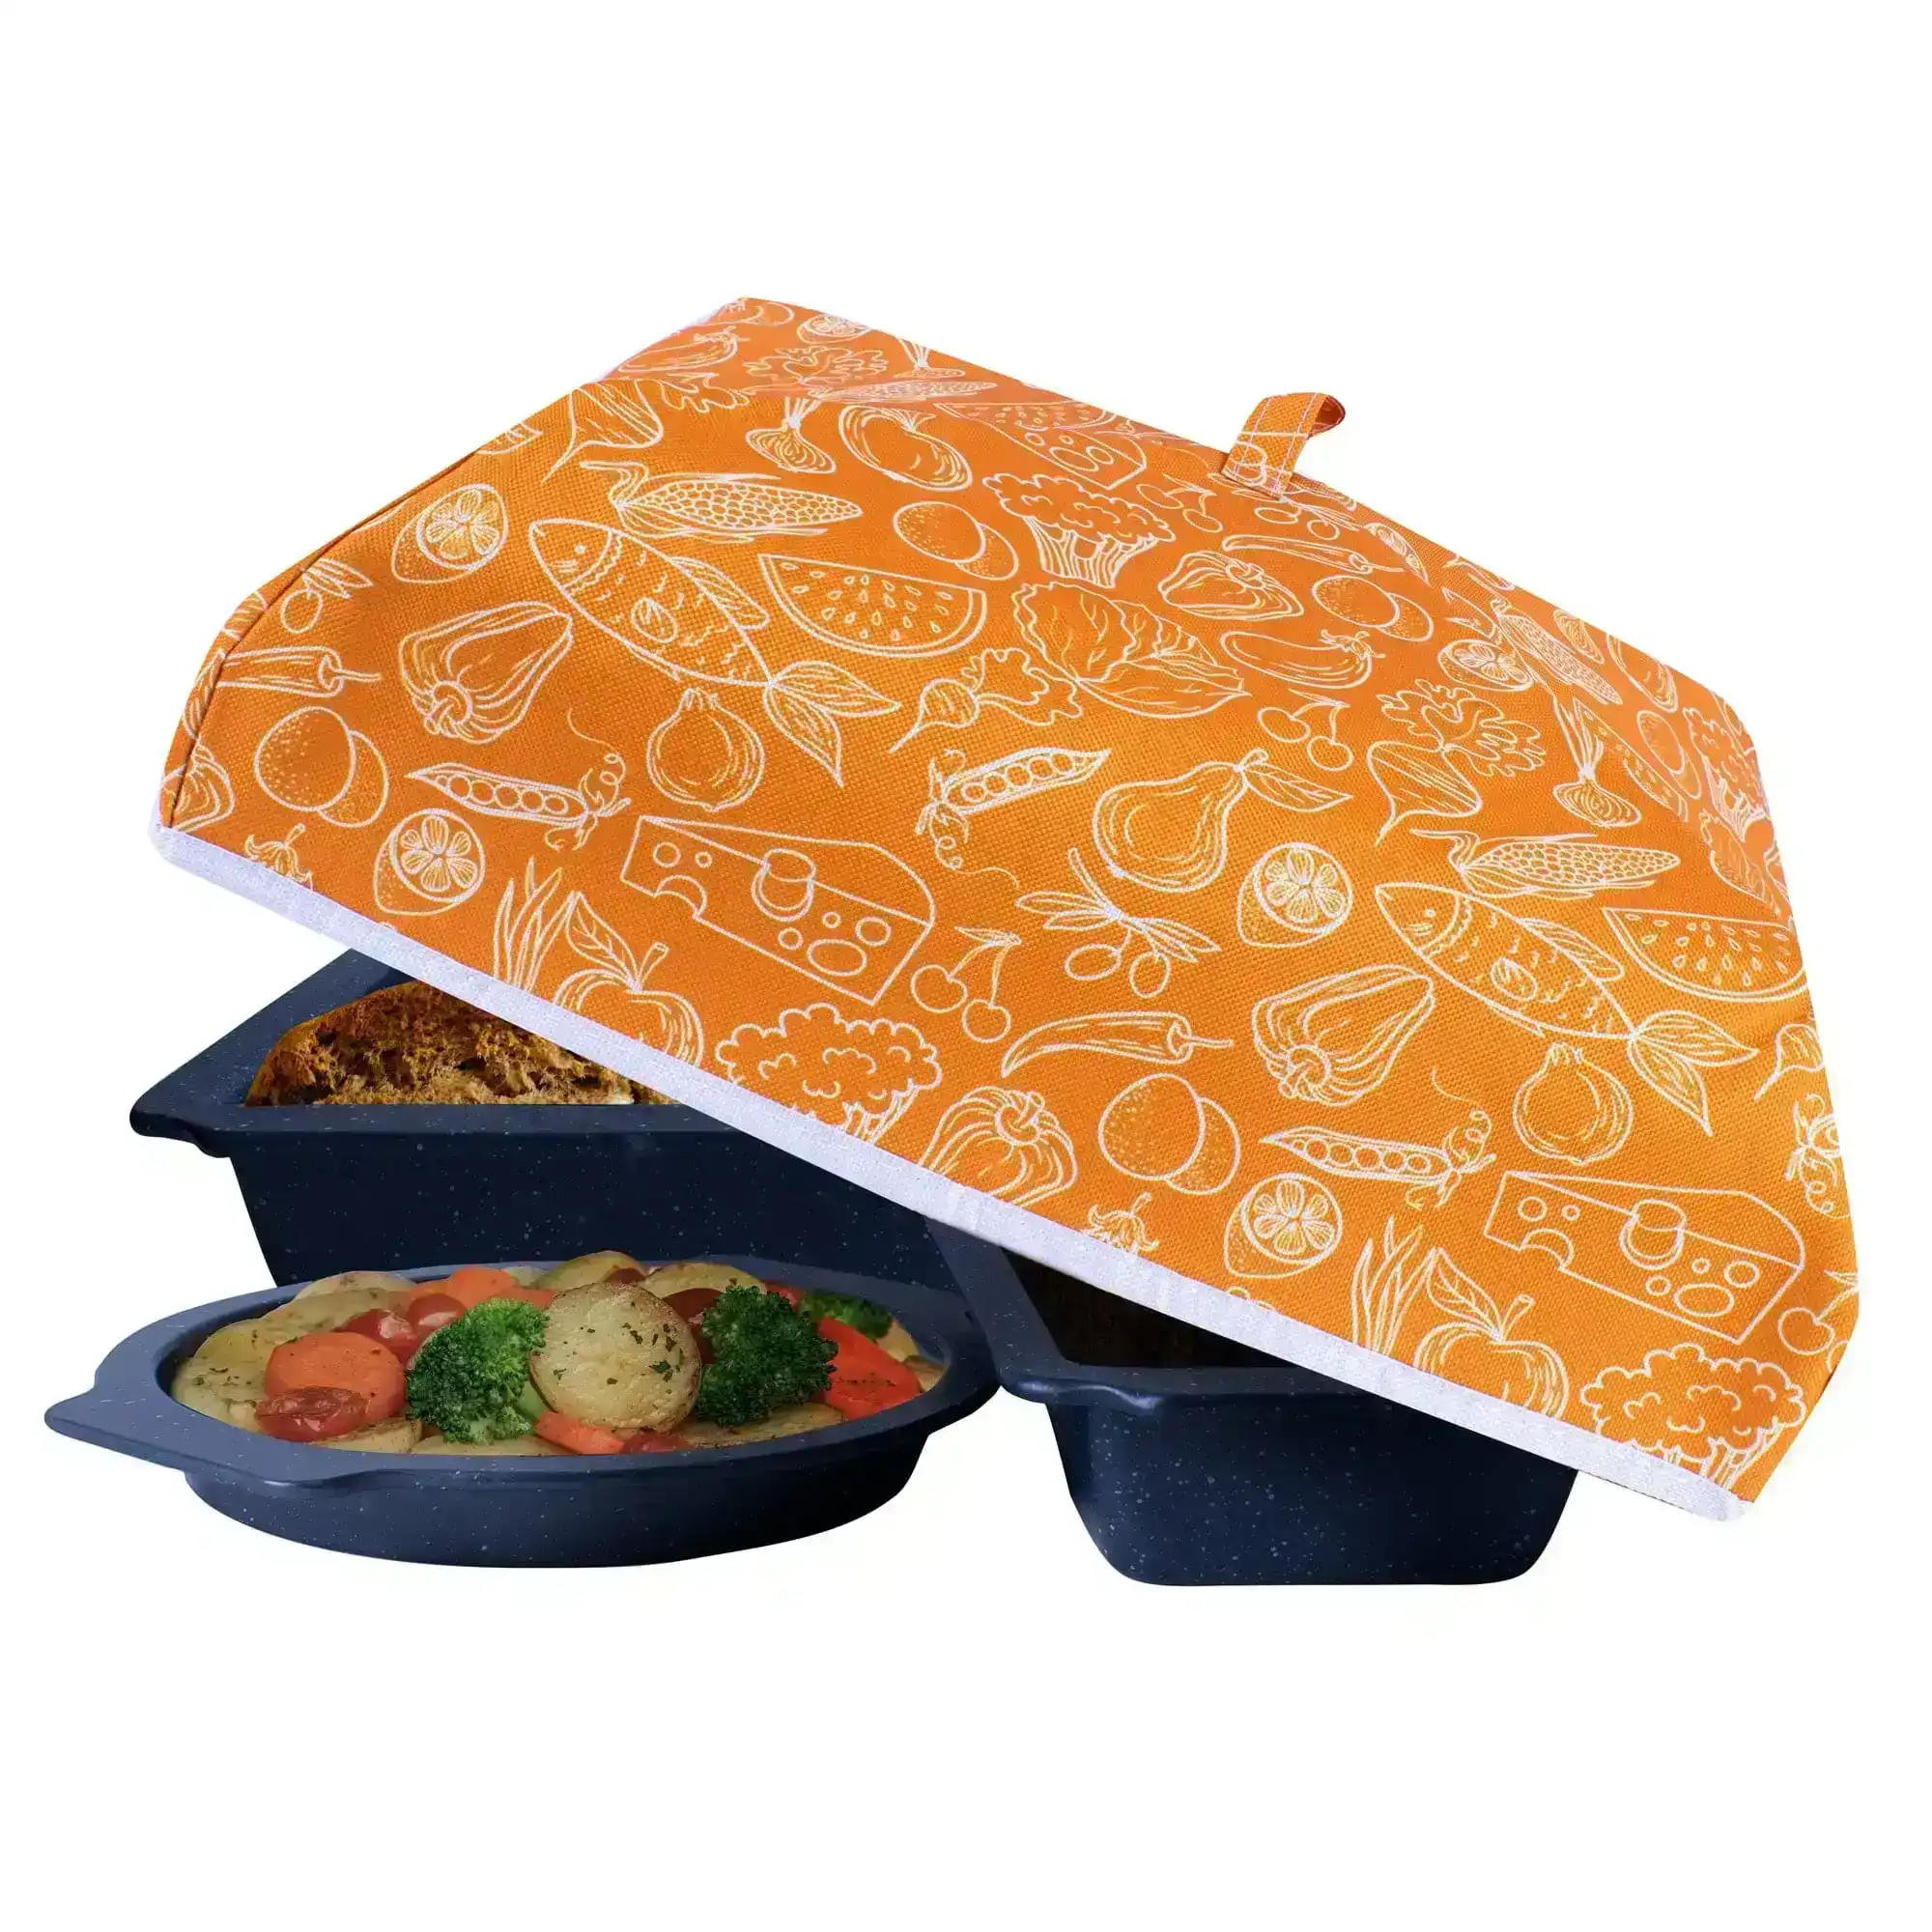 37cm Insulated Food Cover